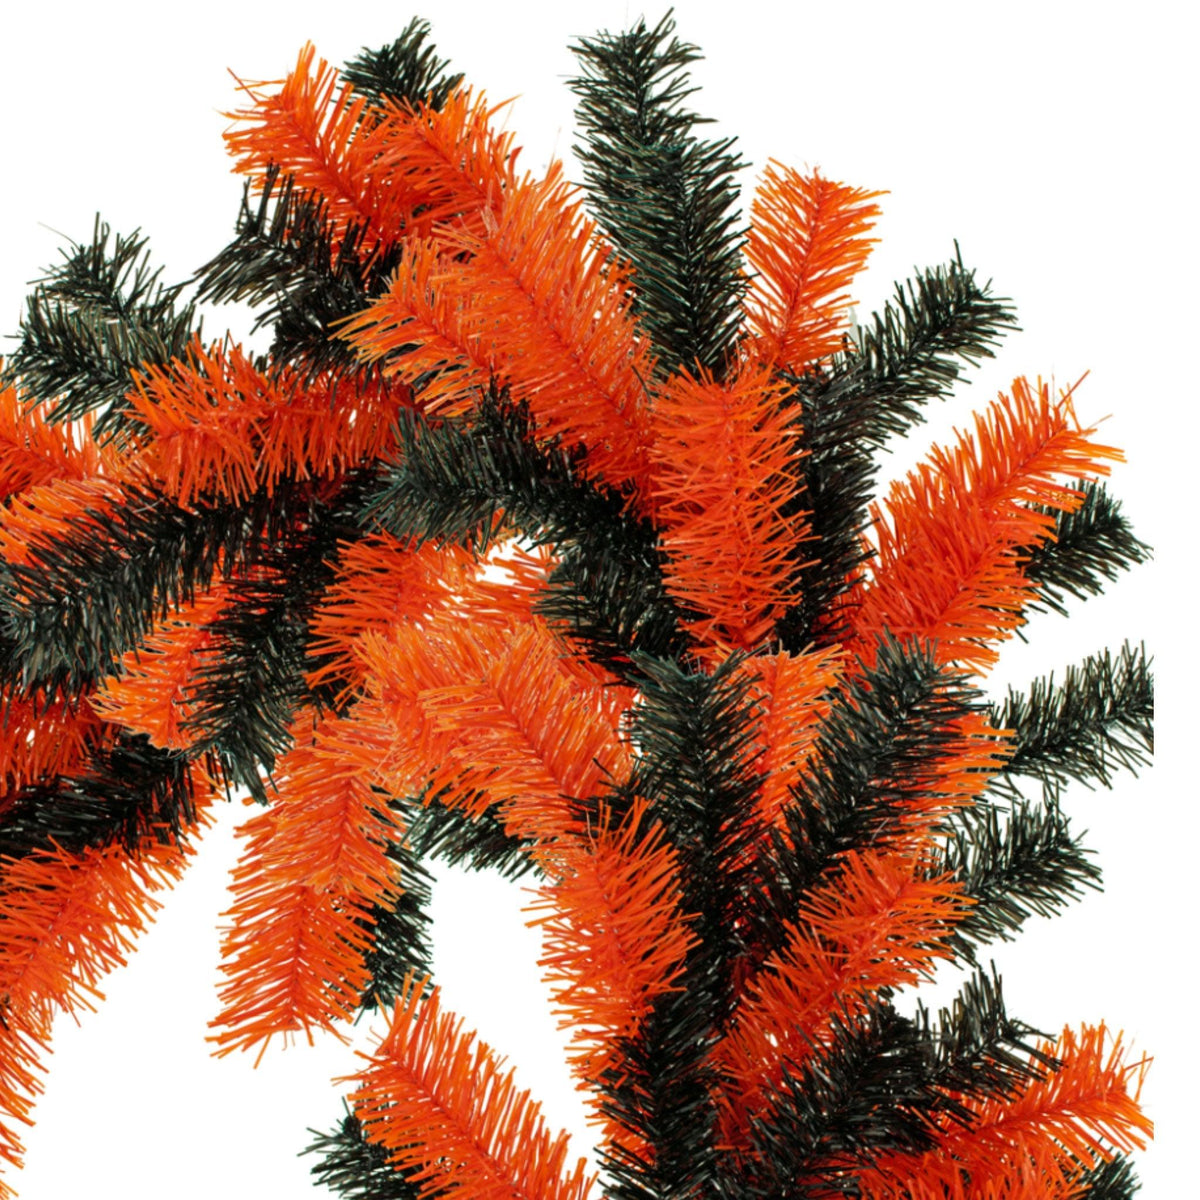 Shop for Lee Display's brand new 6FT Orange and Black Halloween Tinsel Brush Garlands on sale now at leedisplay.com.  Section